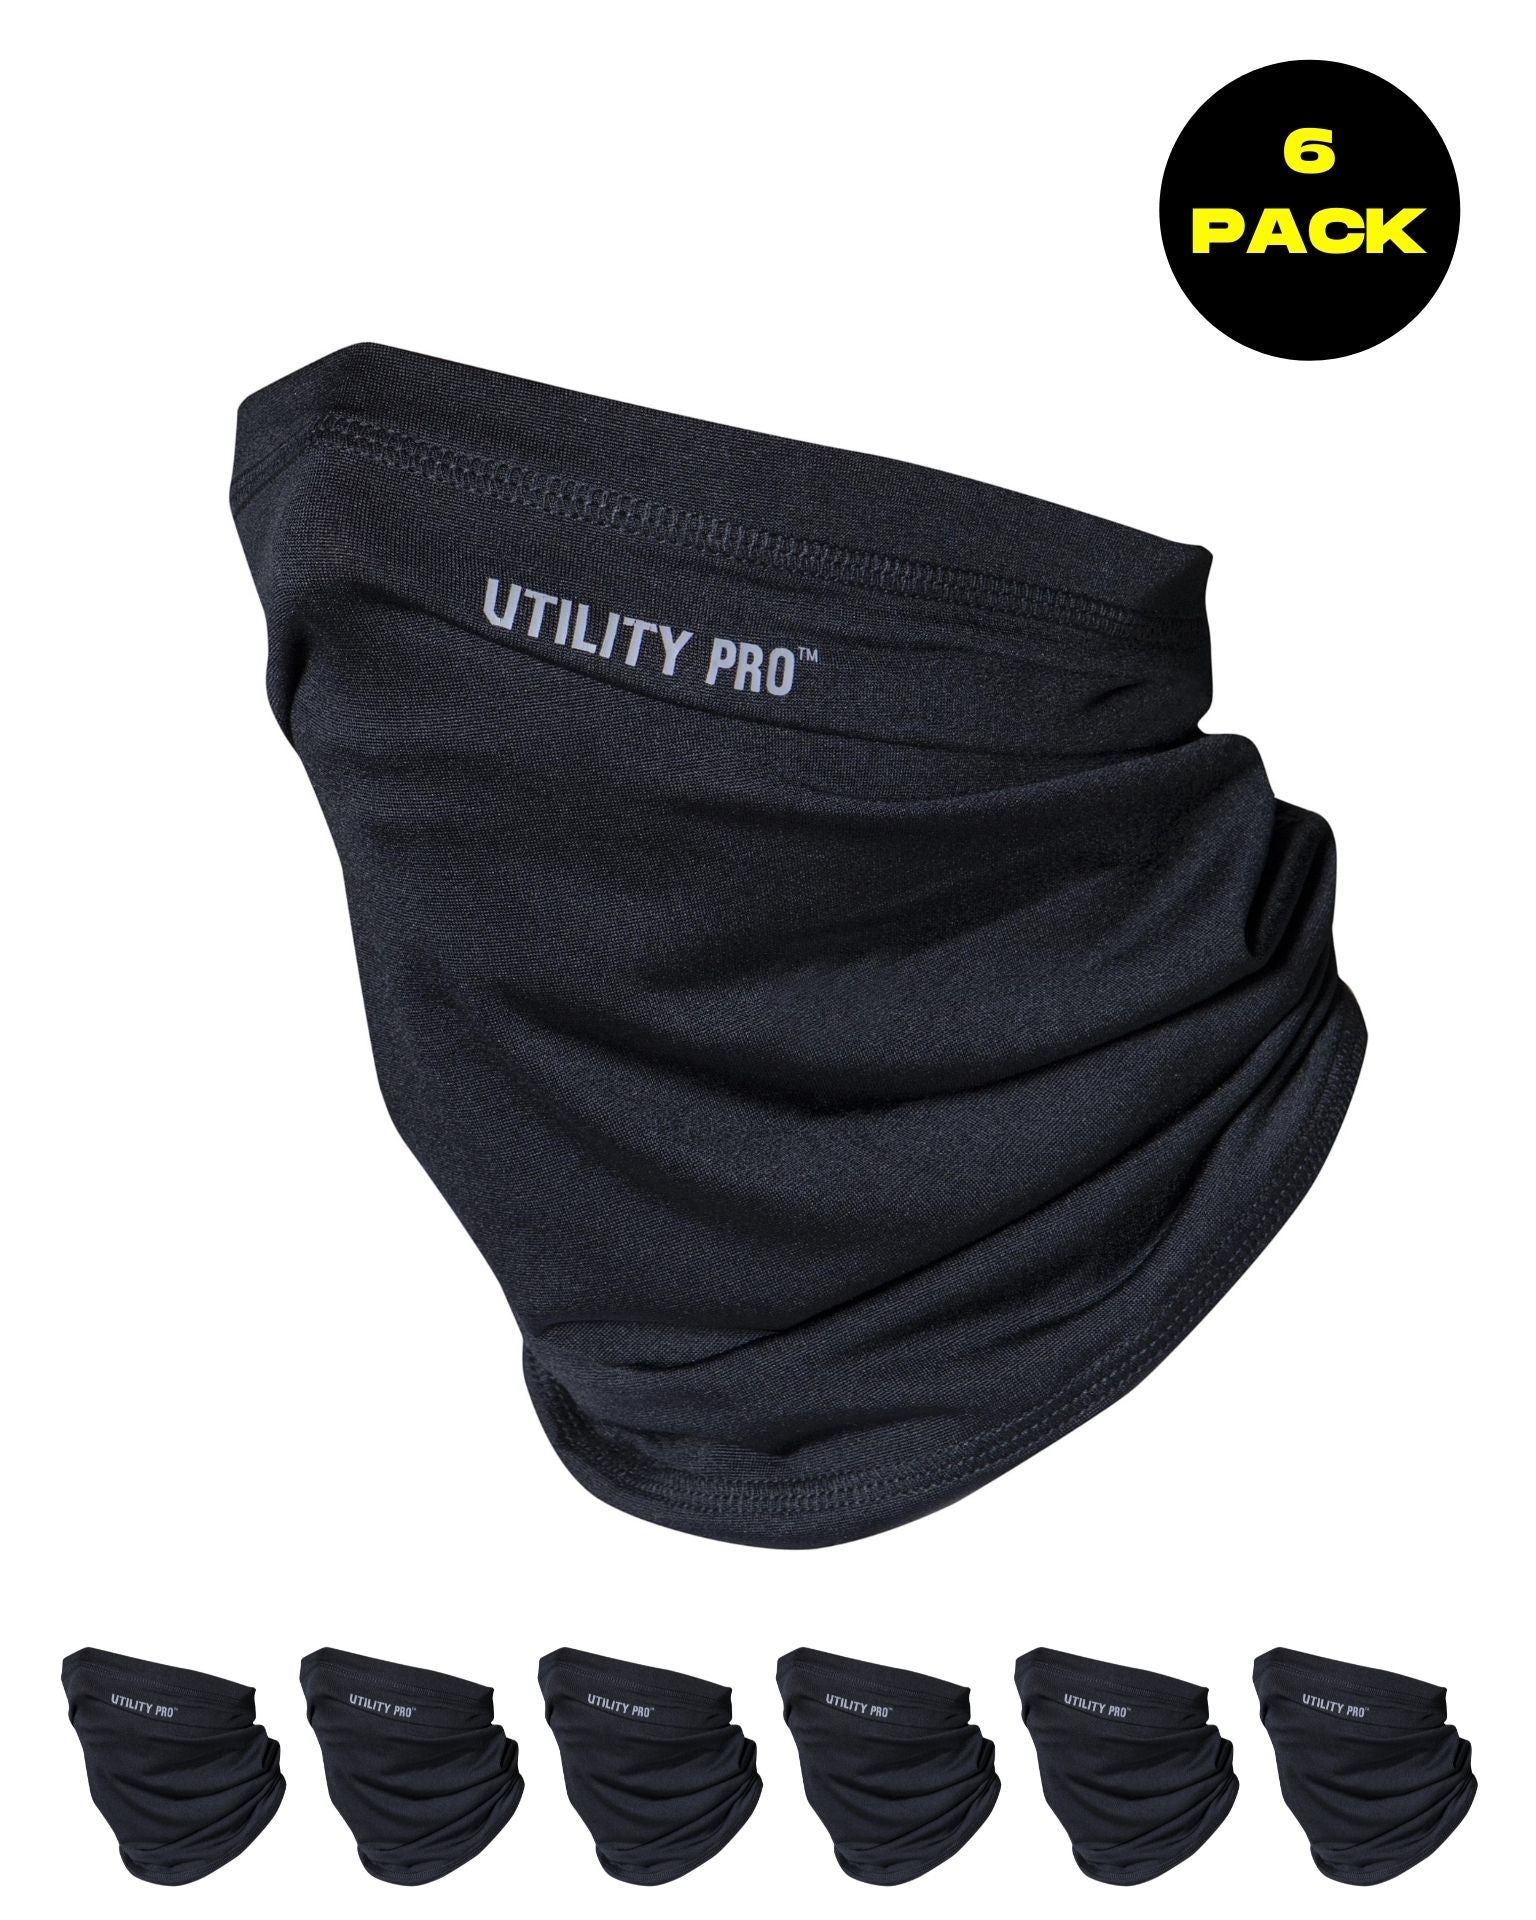 UPA937 Breathable Neck Gaiter in Black (6-pack)